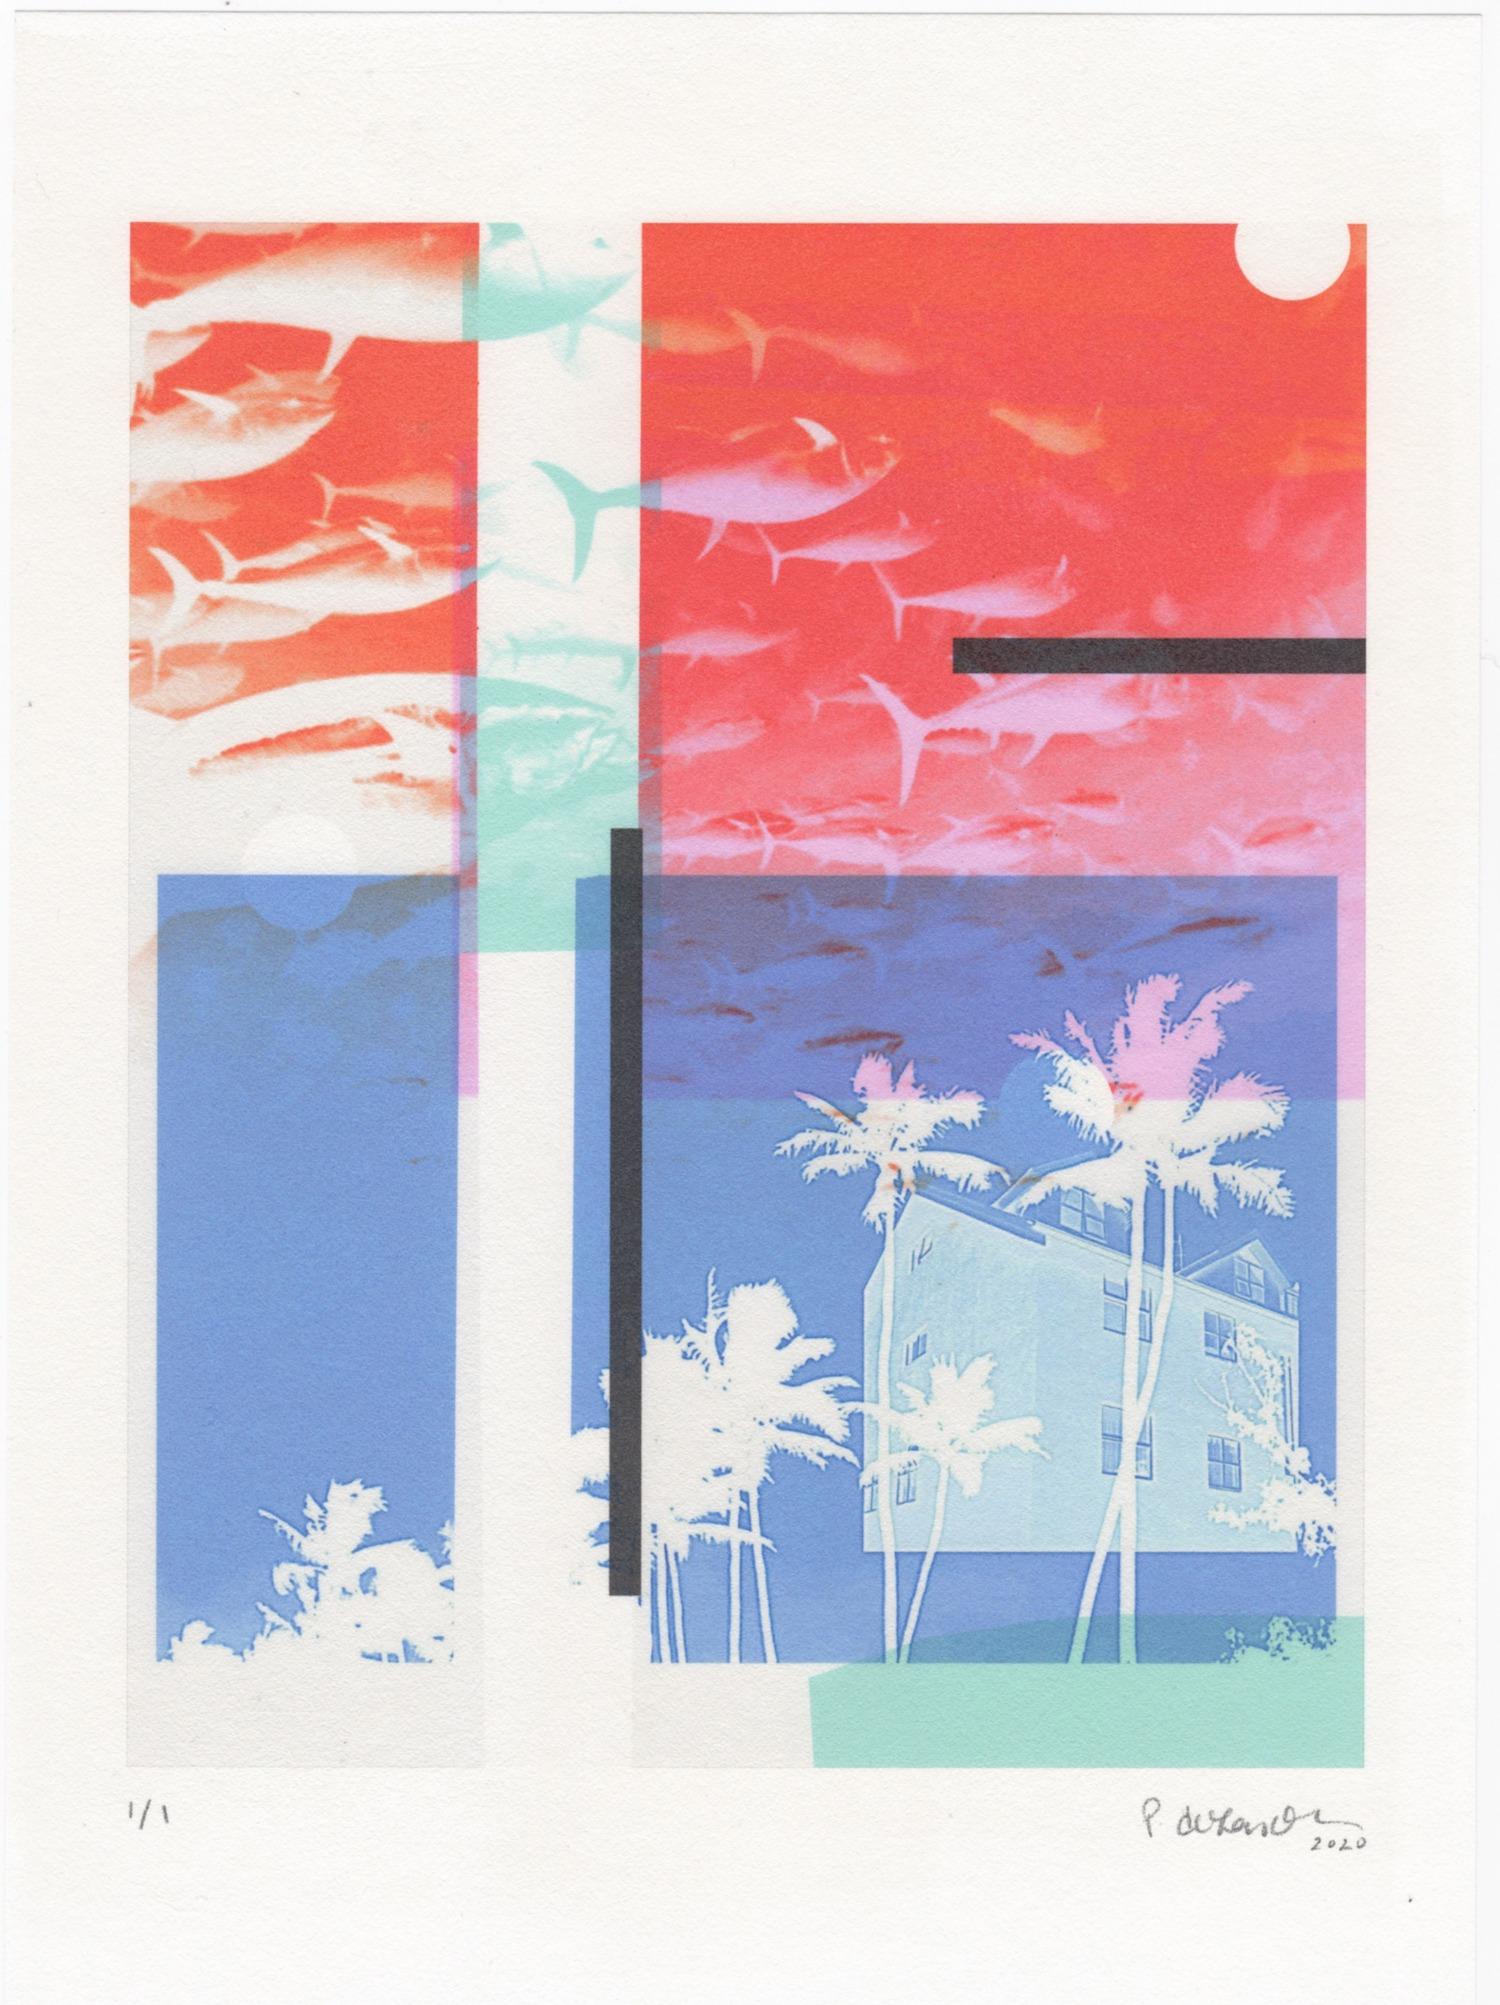 Patty deGrandpre Abstract Print - "Kauai, Island Life", photo, abstract, landscape, blue, turquoise, red, pink